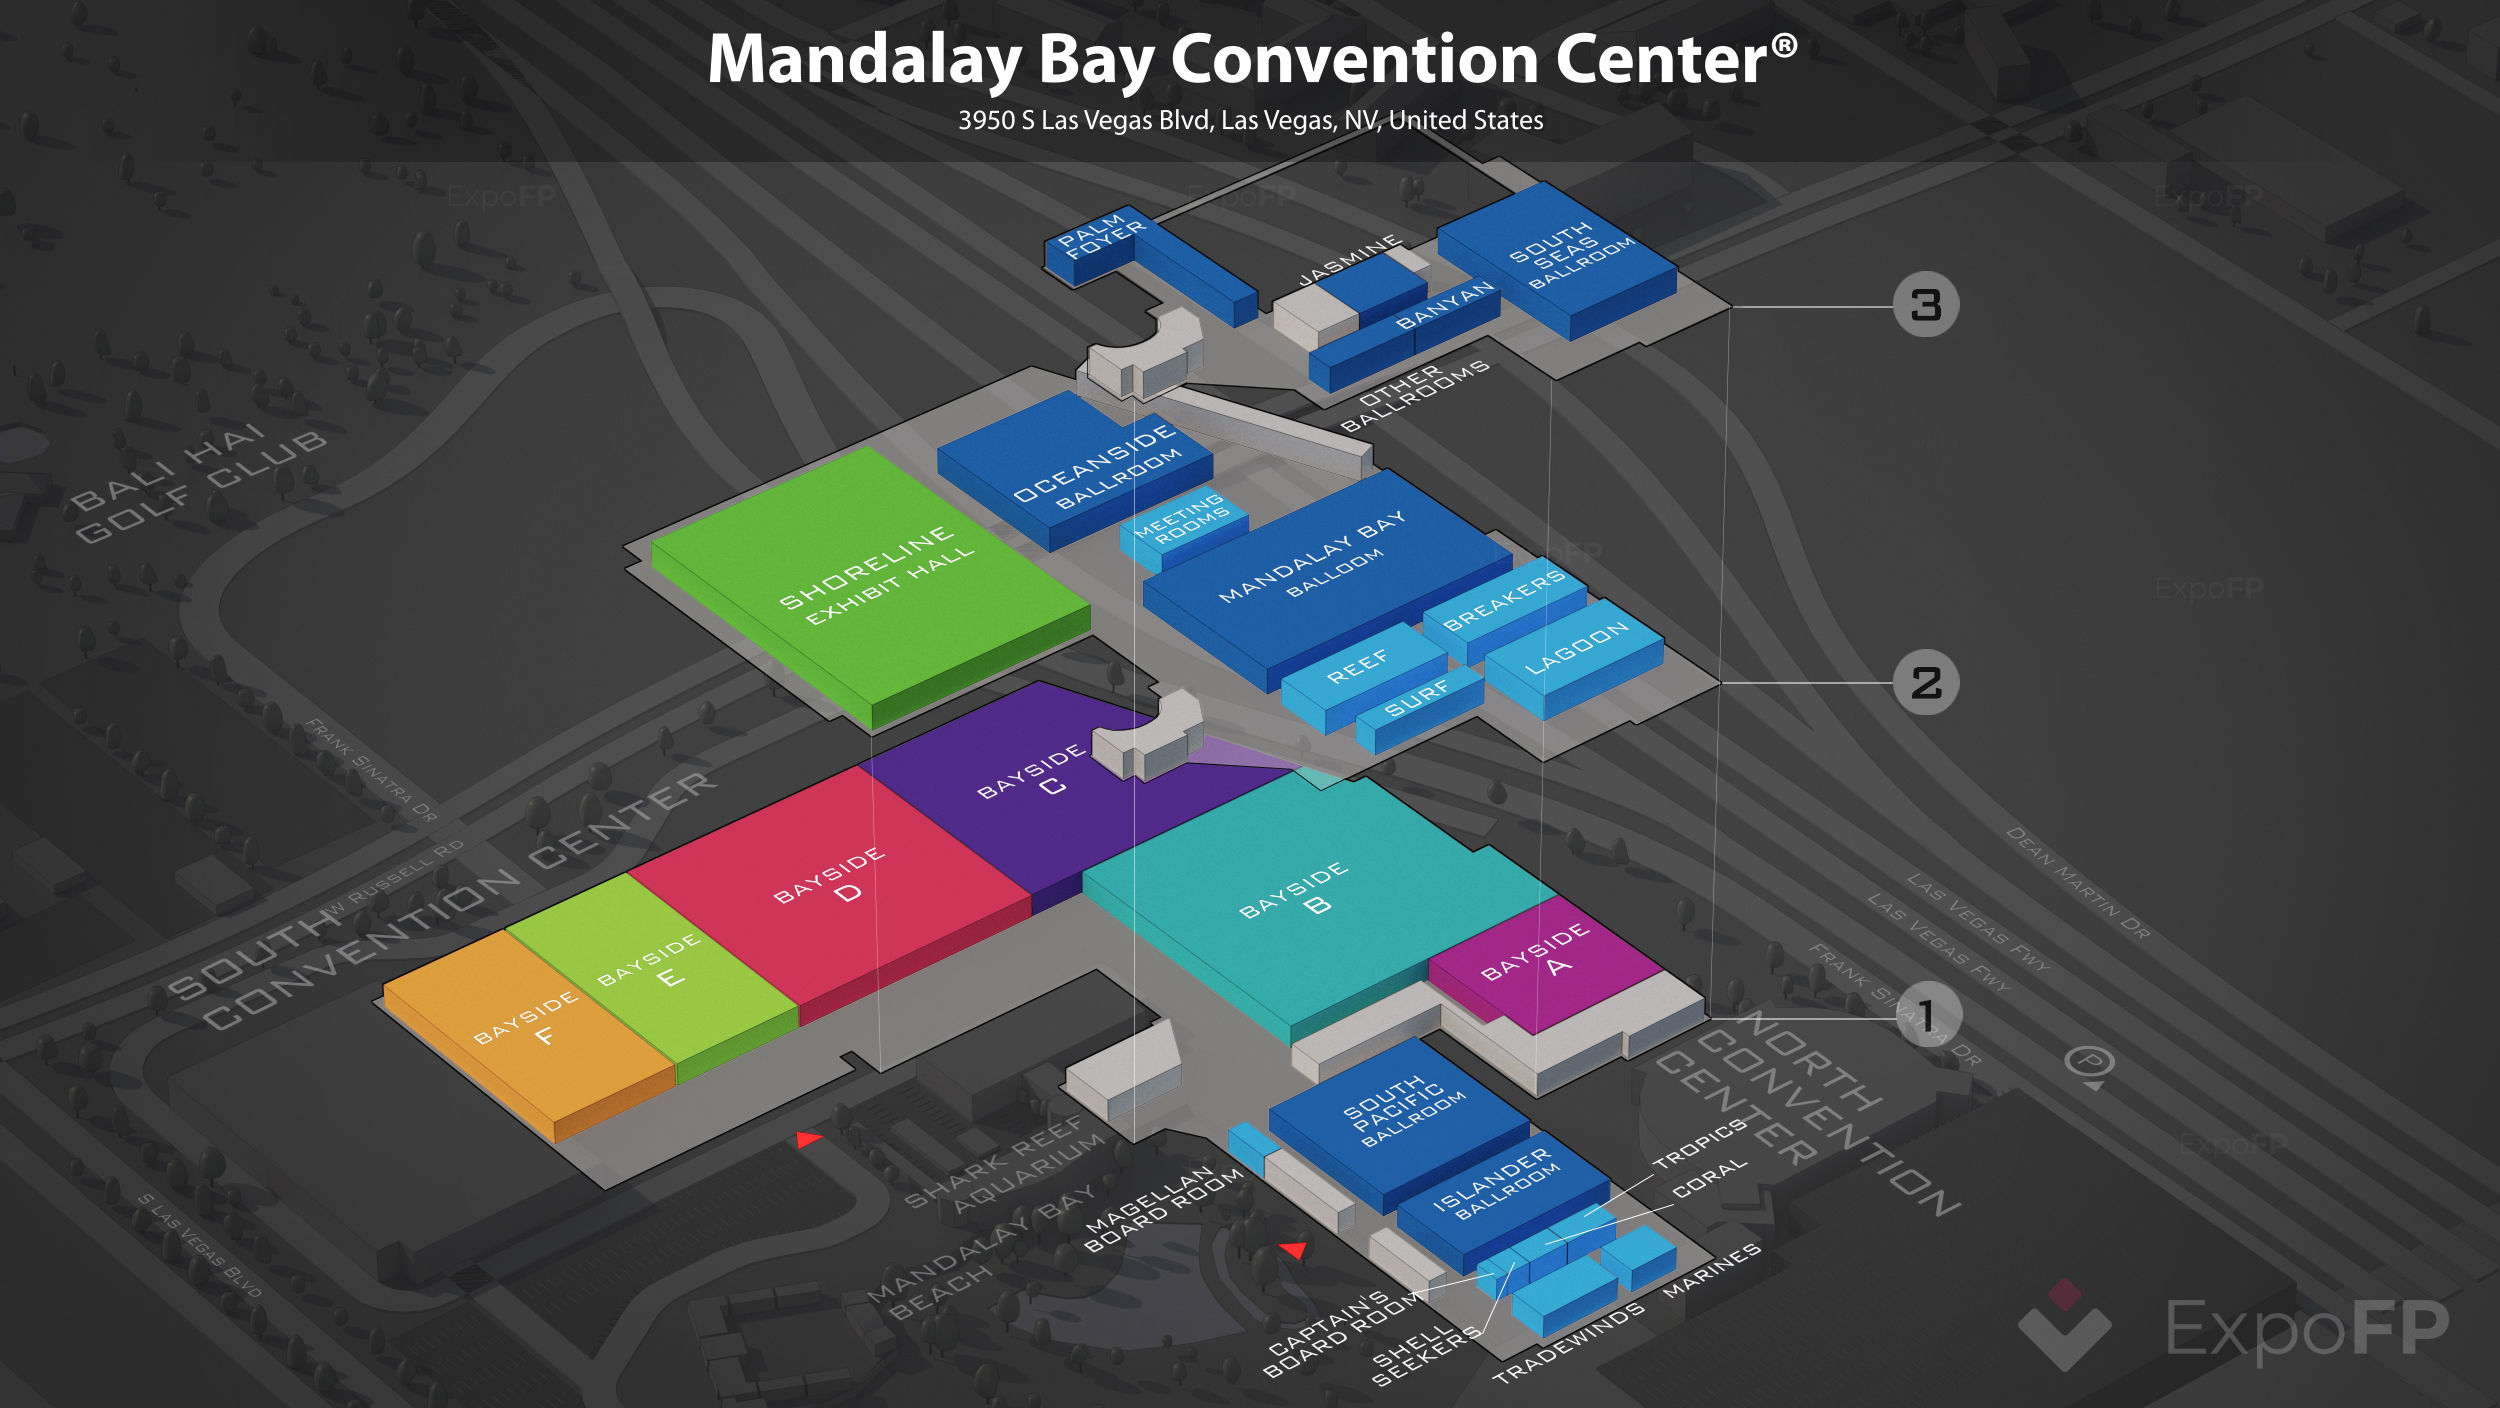 Mandalay Bay Convention Center Schedule 2022 Mandalay Bay Convention Center Floor Plan